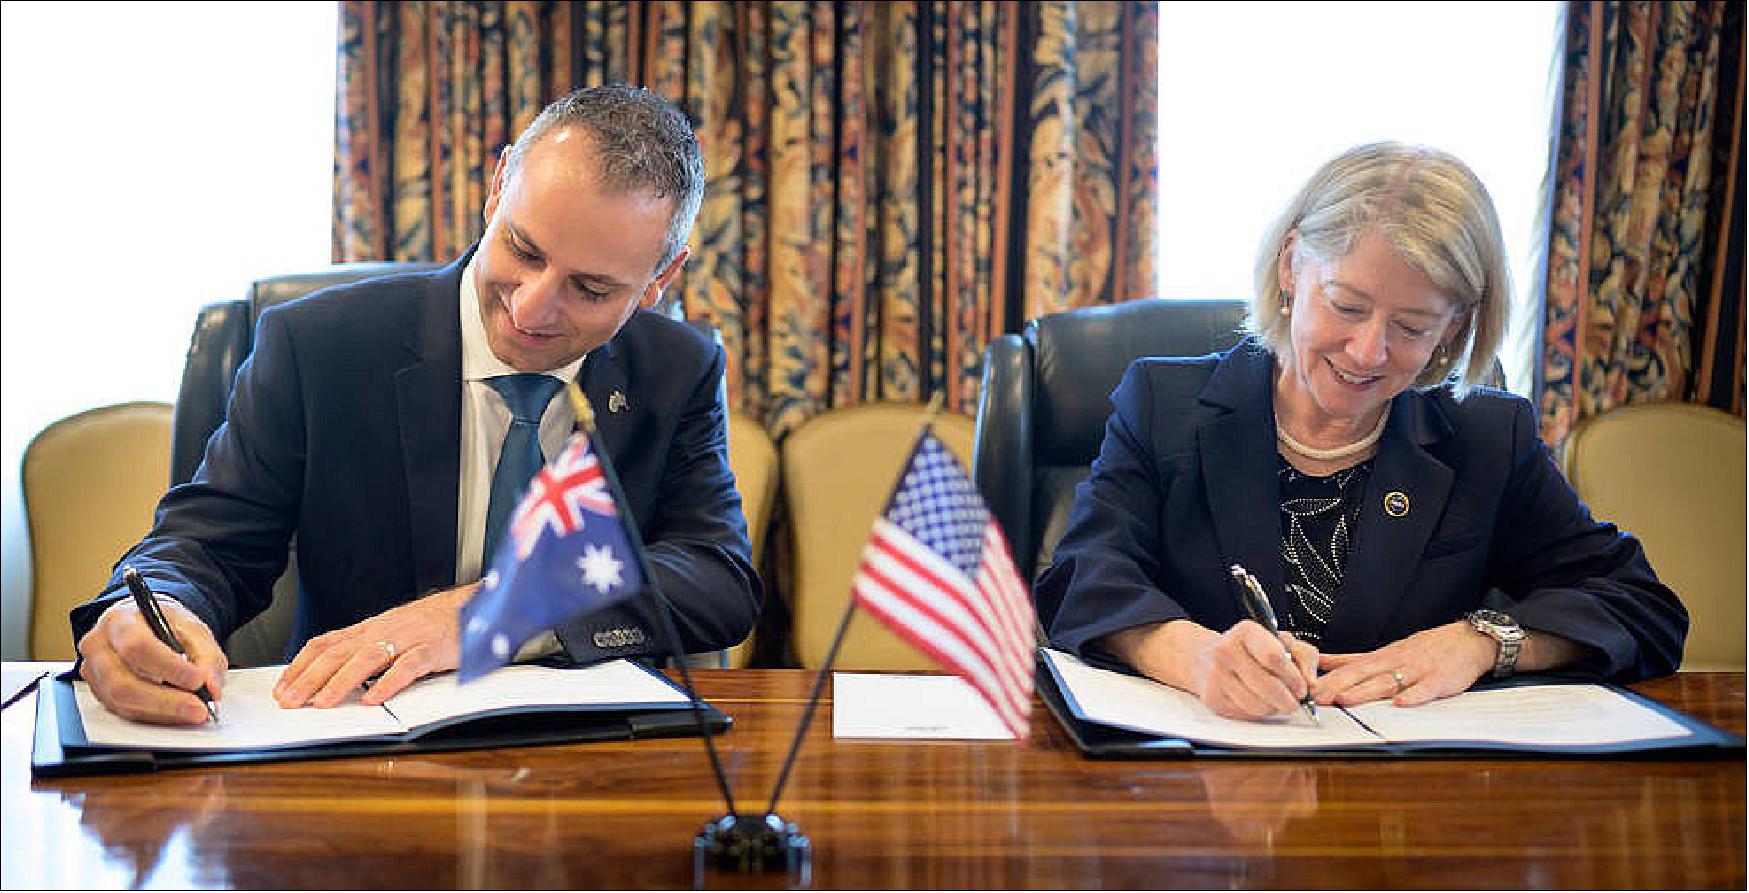 Figure 4: Australian Space Agency Head Enrico Palermo, left, and NASA Deputy Administrator Pam Melroy, sign a joint statement of intent for cooperation in Earth science during the 37th Space Symposium, Monday, April 4, 2022, in Colorado Springs, Colorado (photo credit: NASA, Bill Ingalls)